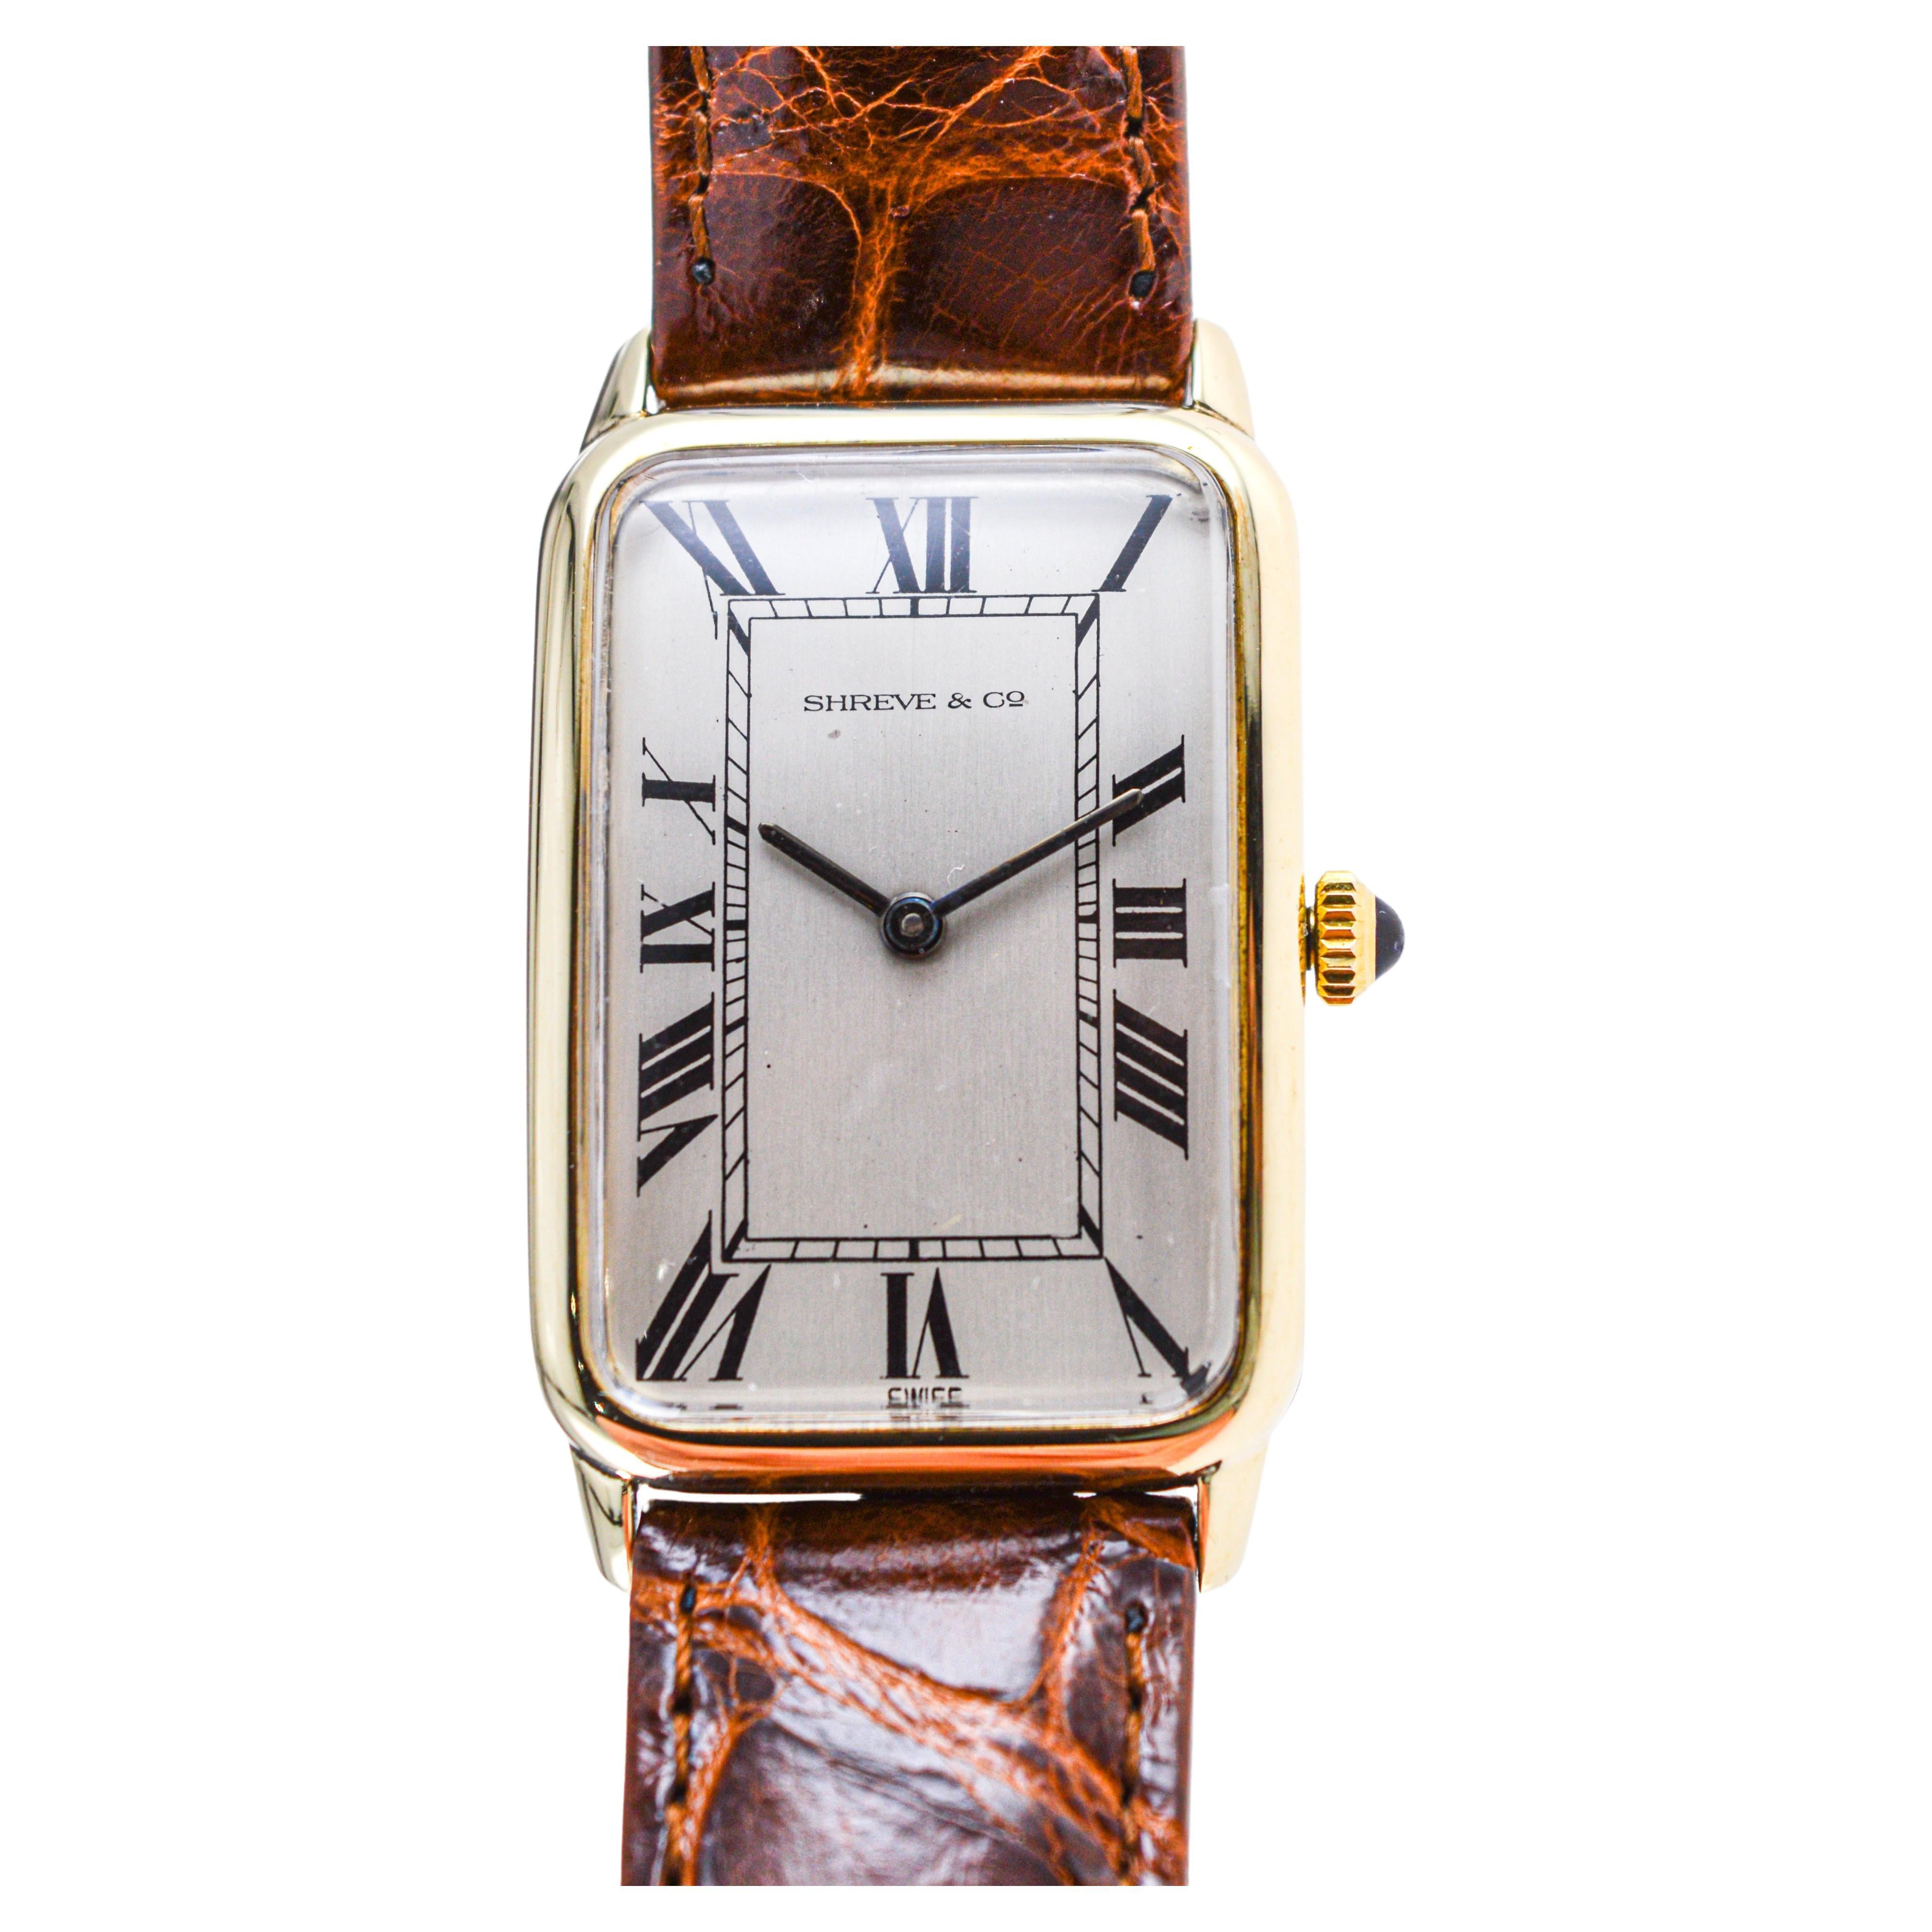 Concord for Shreve & Co. Yellow Gold Manual Wind Watch 1980's Art Deco Style  For Sale 4